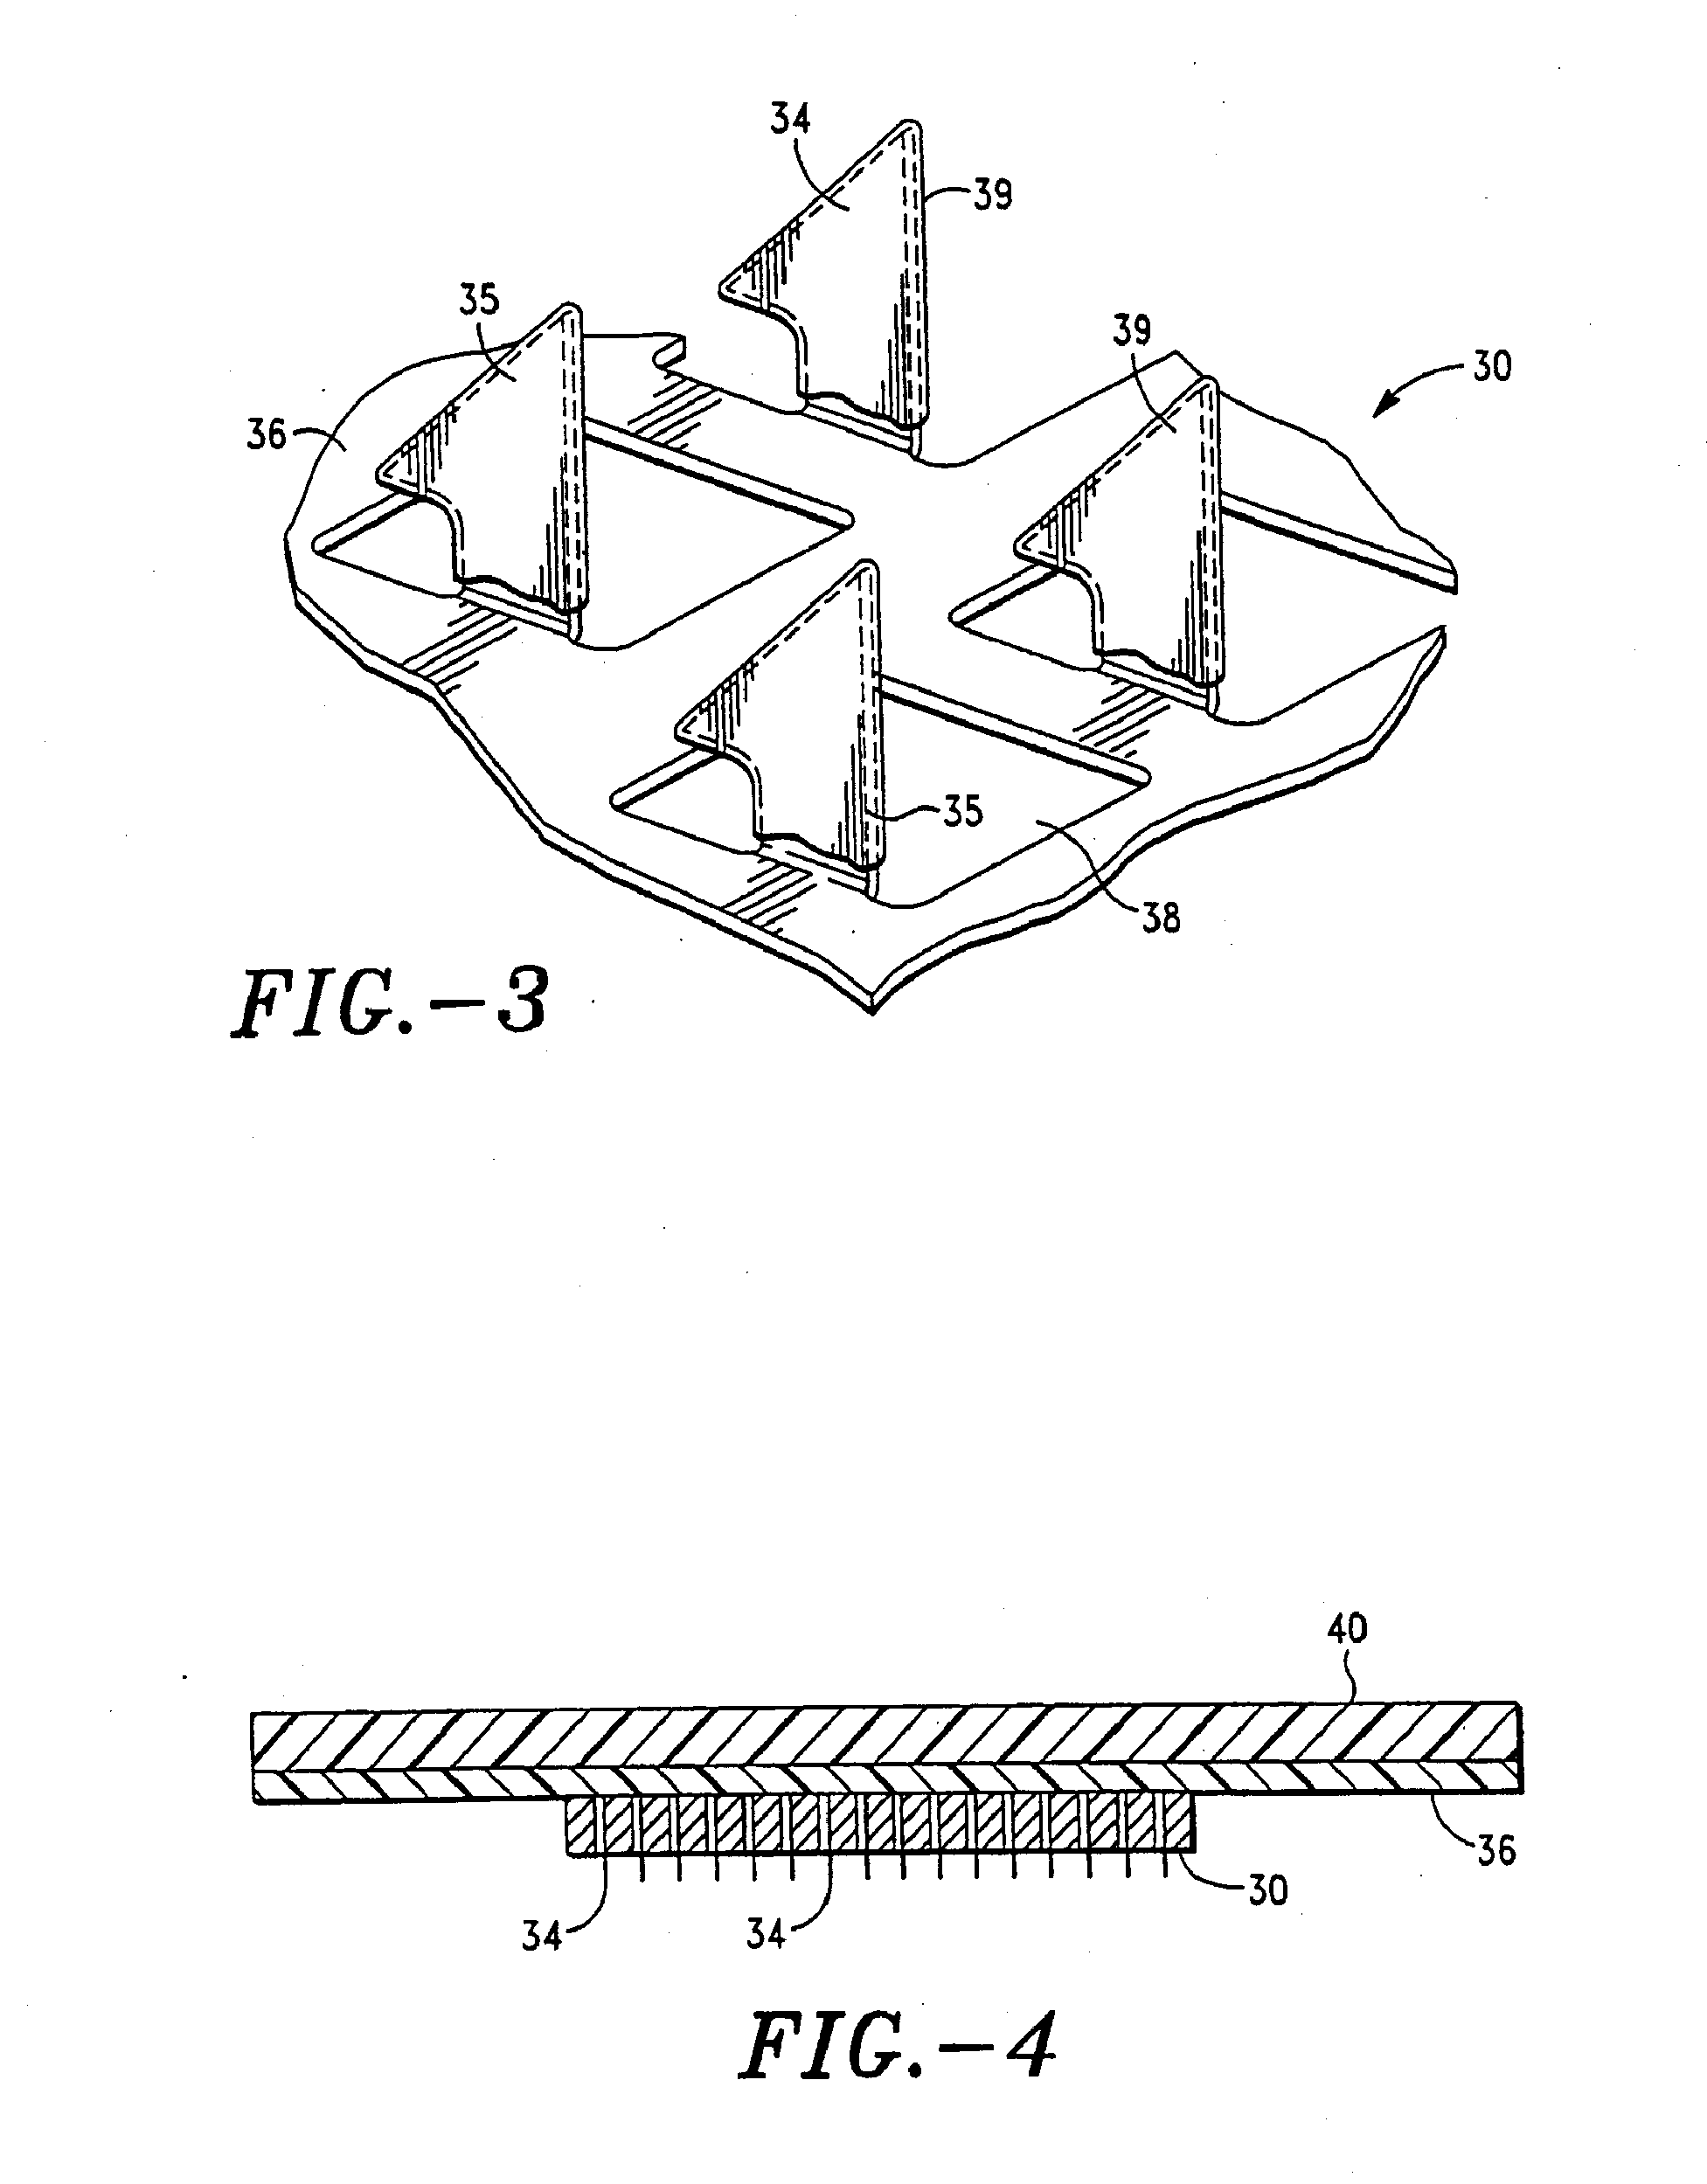 Apparatus and Method for Transdermal Delivery of Parathyroid Hormone Agents to Prevent or Treat Osteopenia